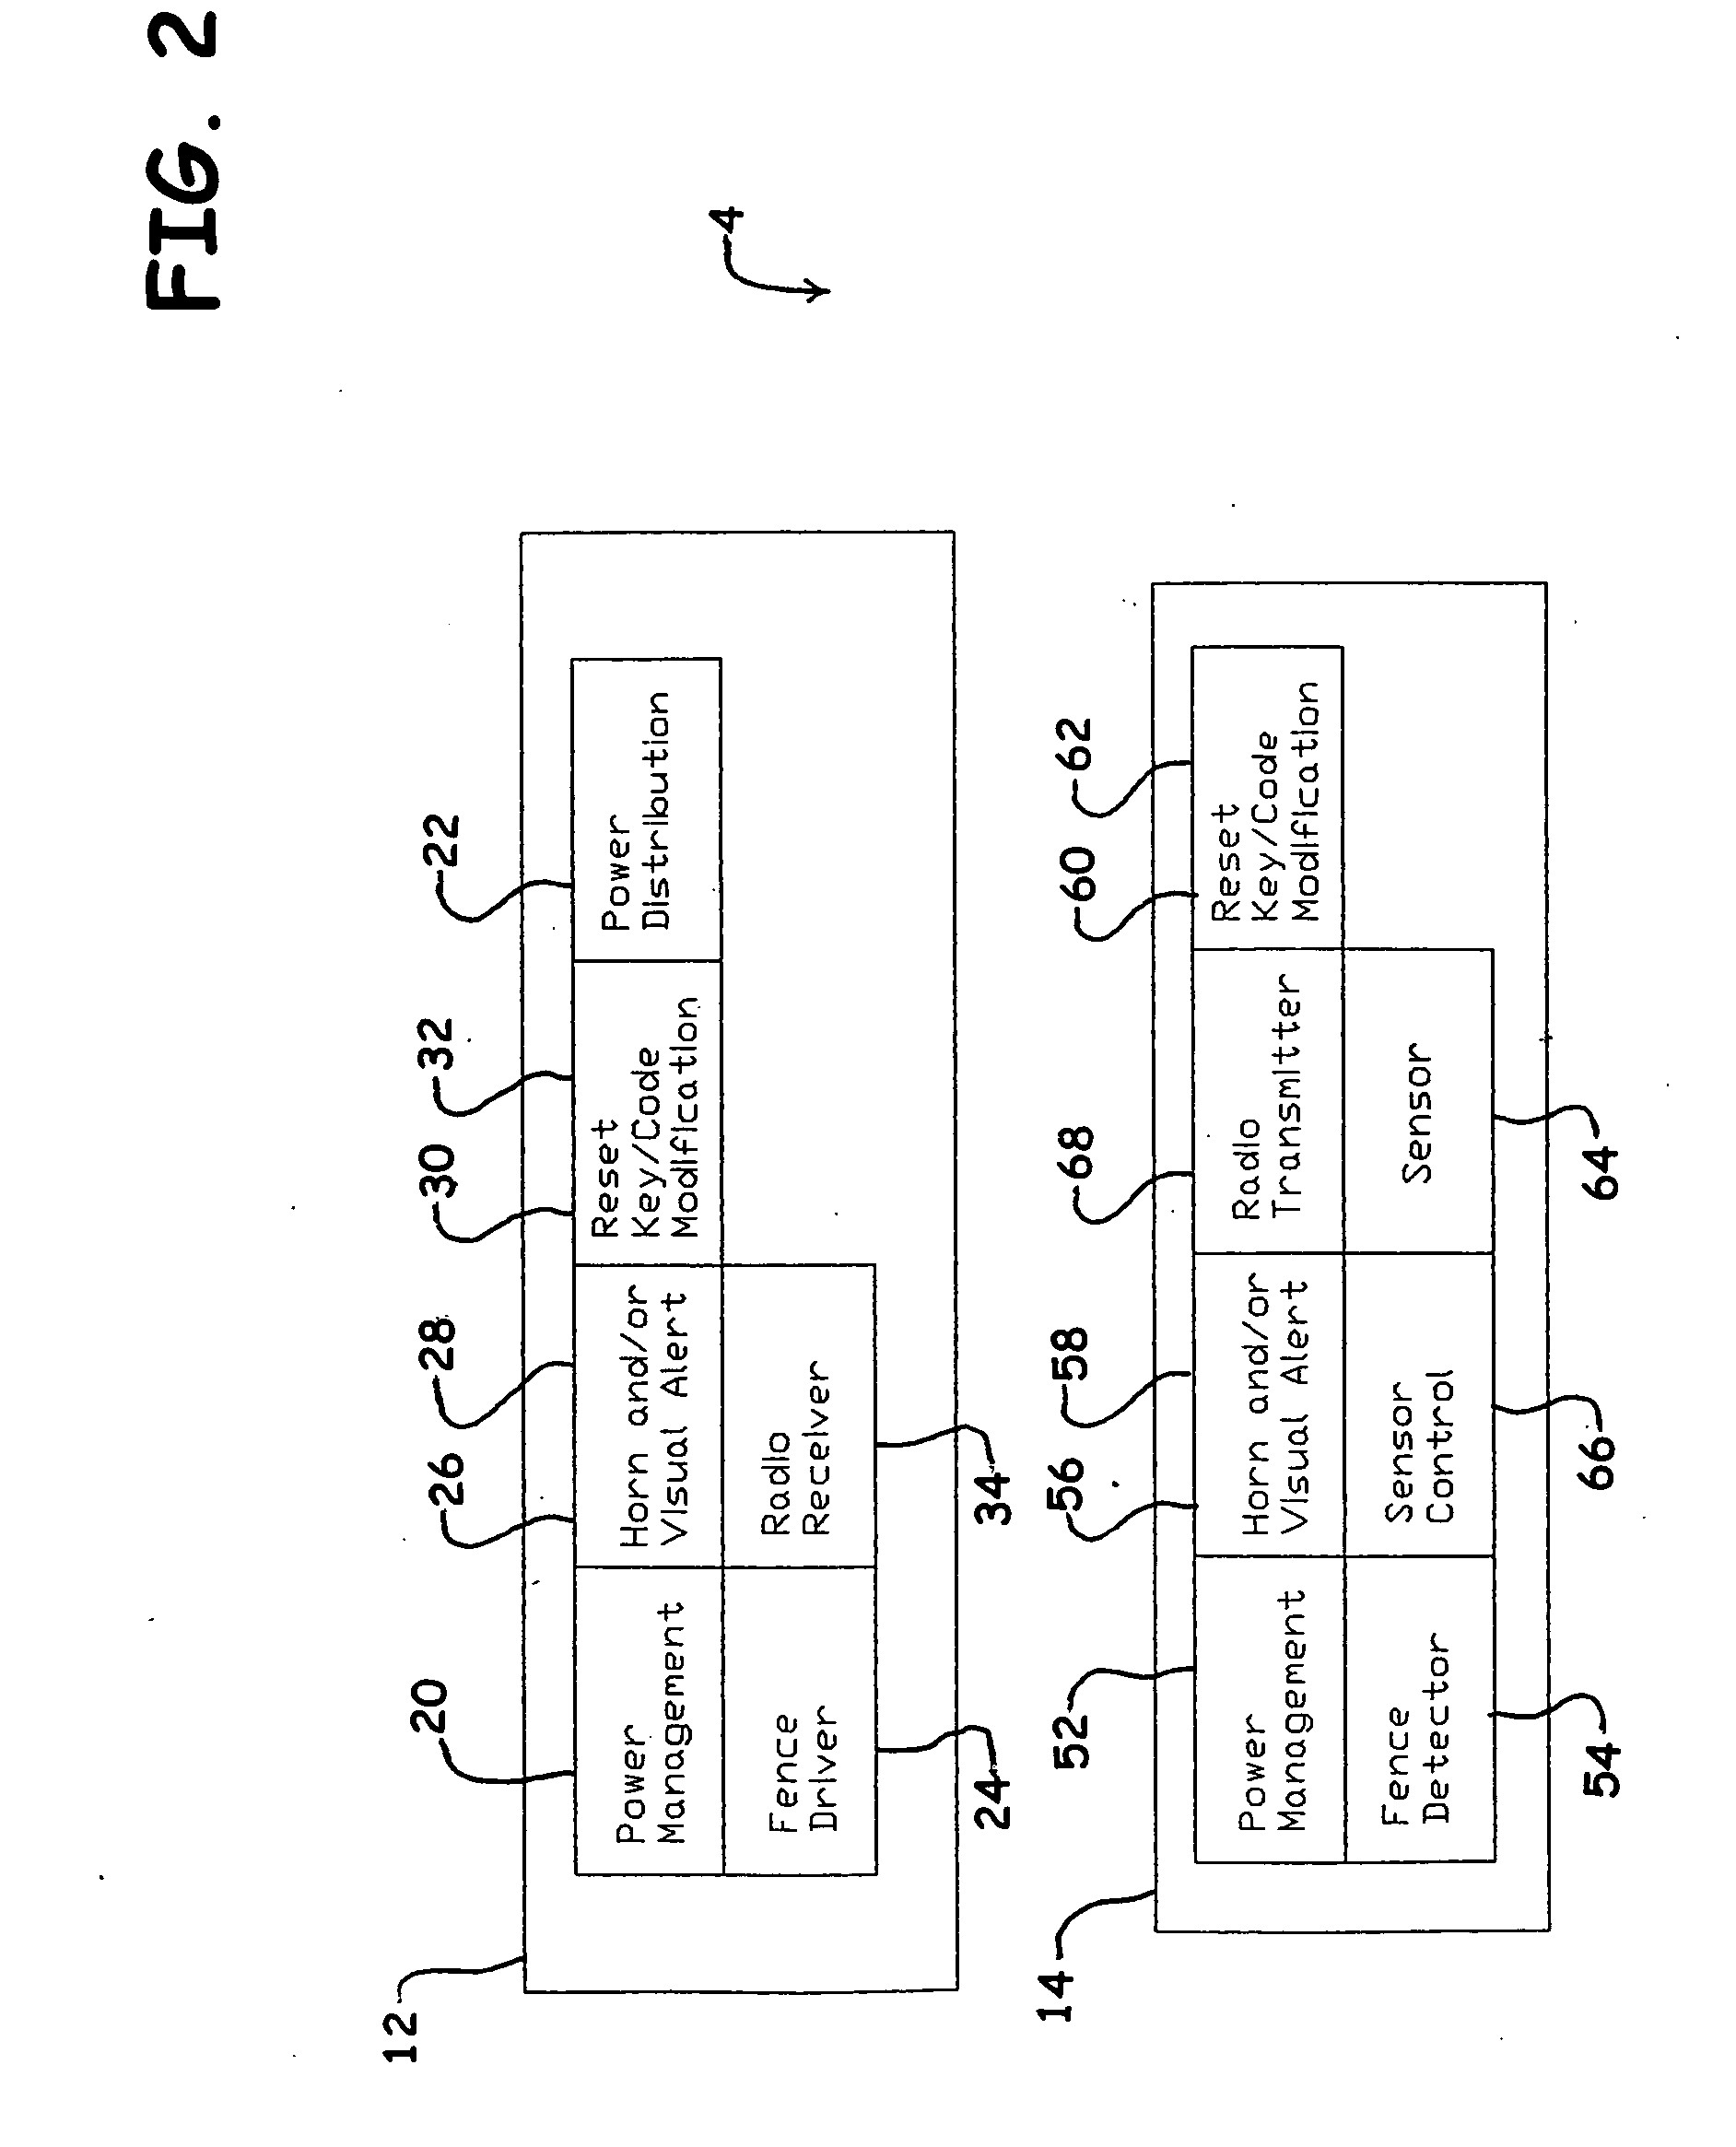 Apparatus, system and/or method for wirelessly securing and/or for wirelessly monitoring an article